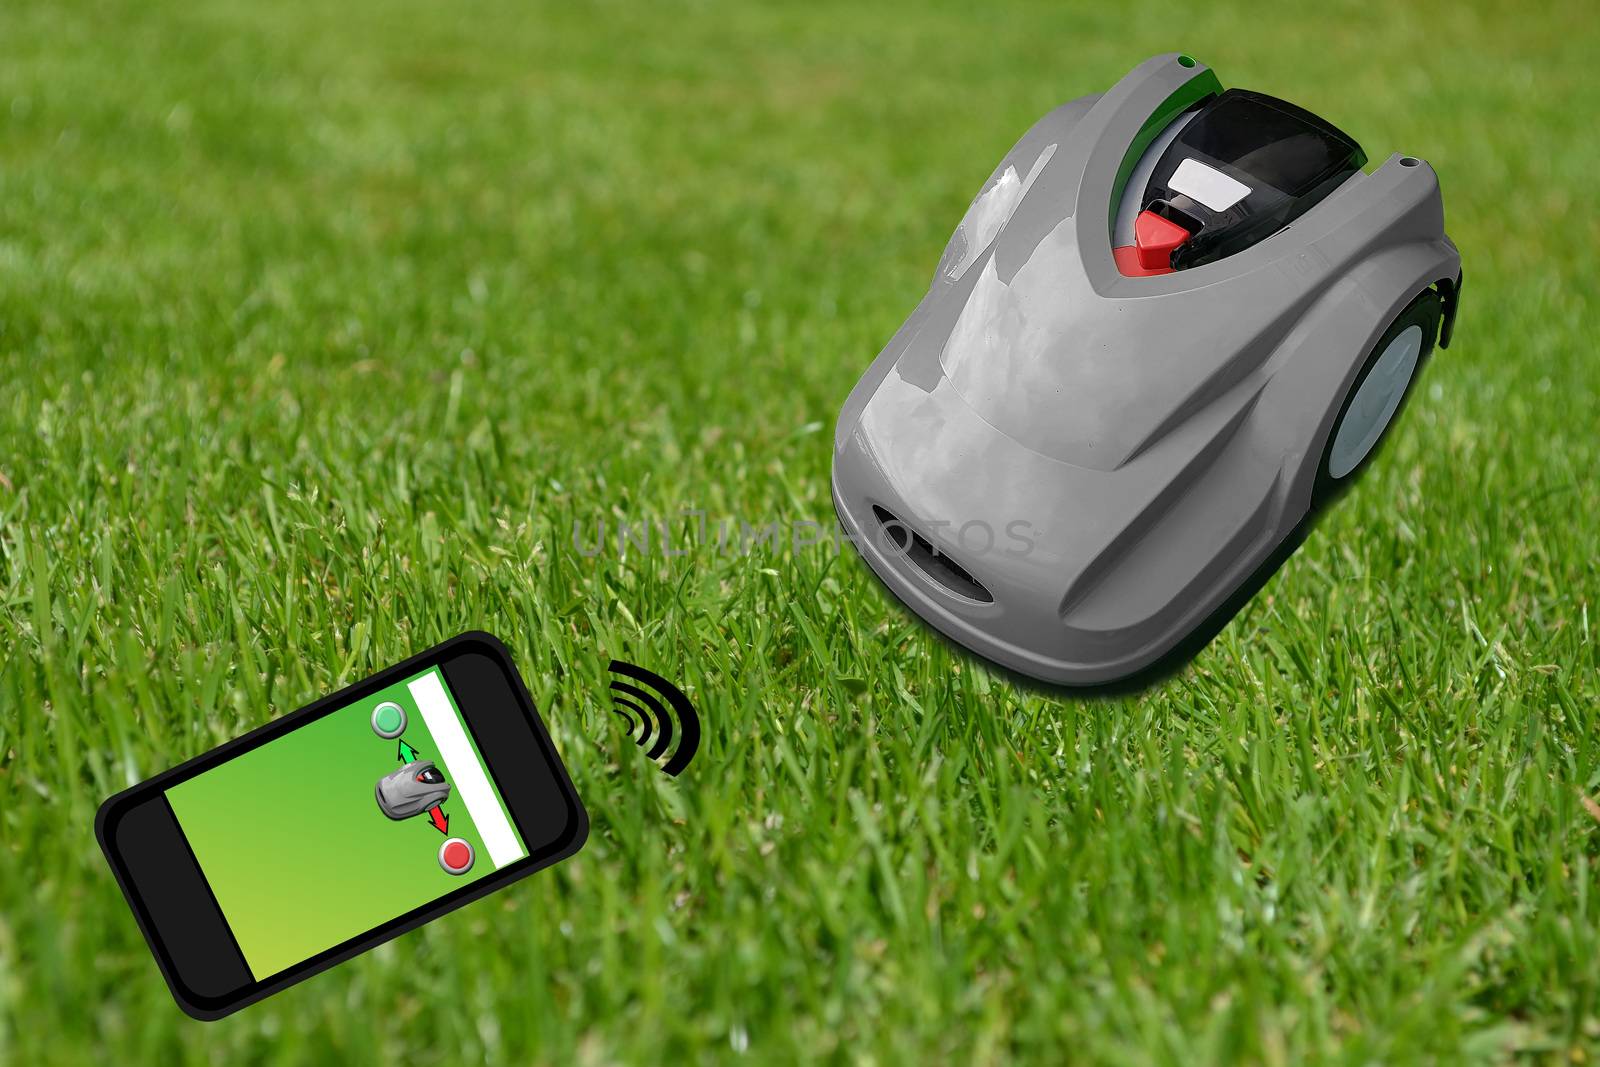 Mowing robot in the garden with smartphone control by JFsPic